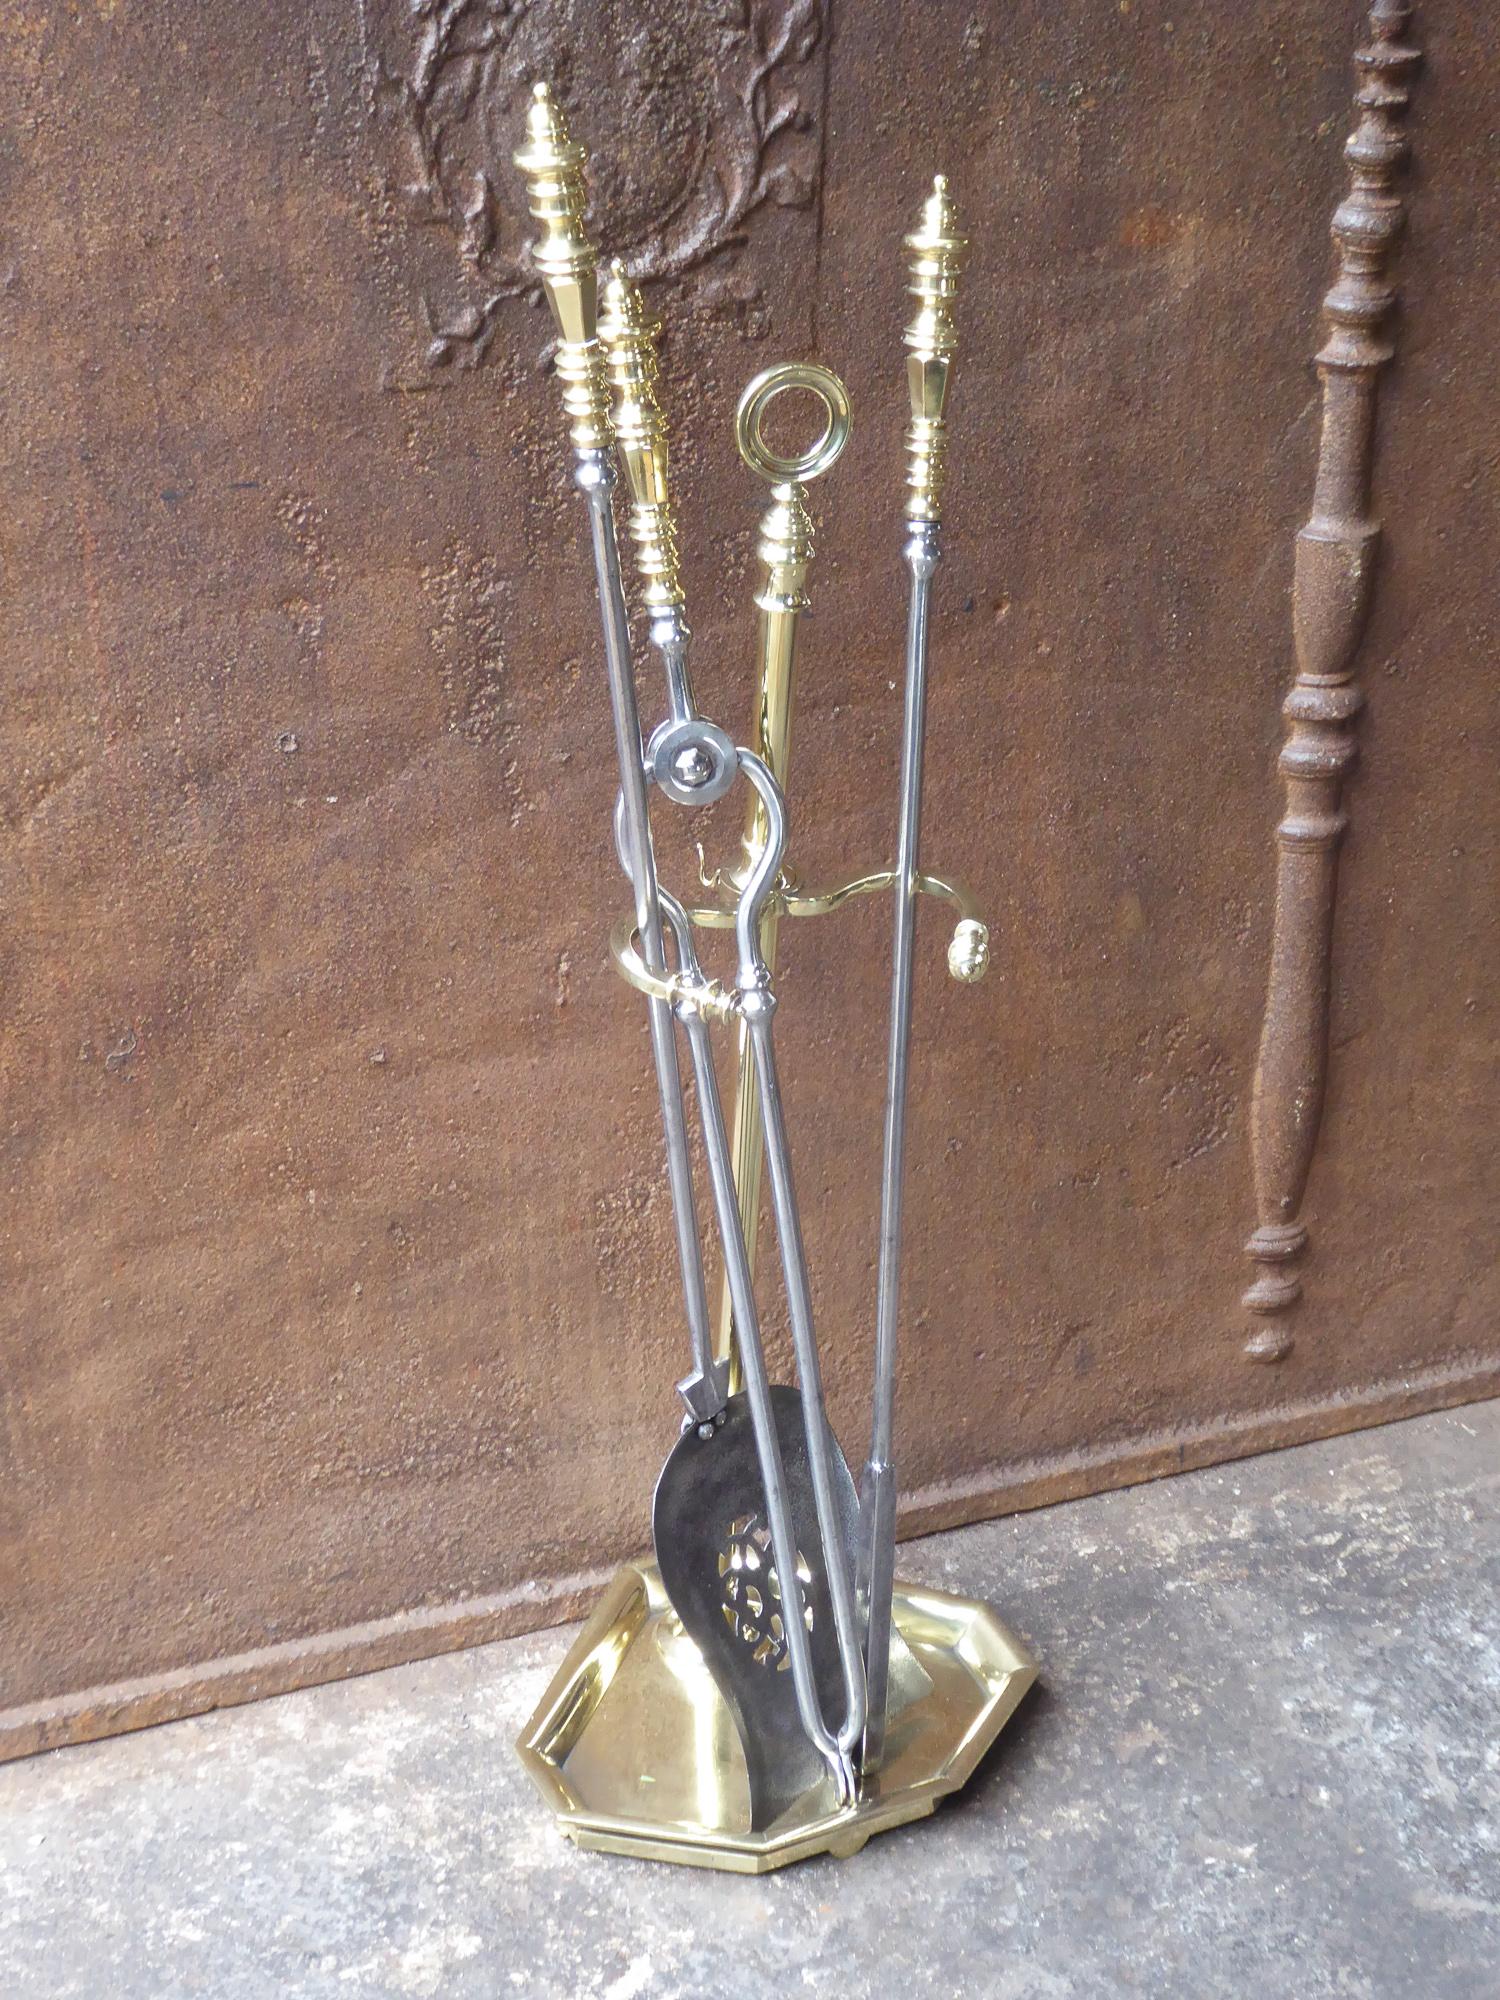 Tall and beautiful 19th century English Victorian fireplace tool set. The companion set of fire irons is made of polished brass and polished steel. It is in a good condition and is fully functional.

We have a unique and specialized collection of